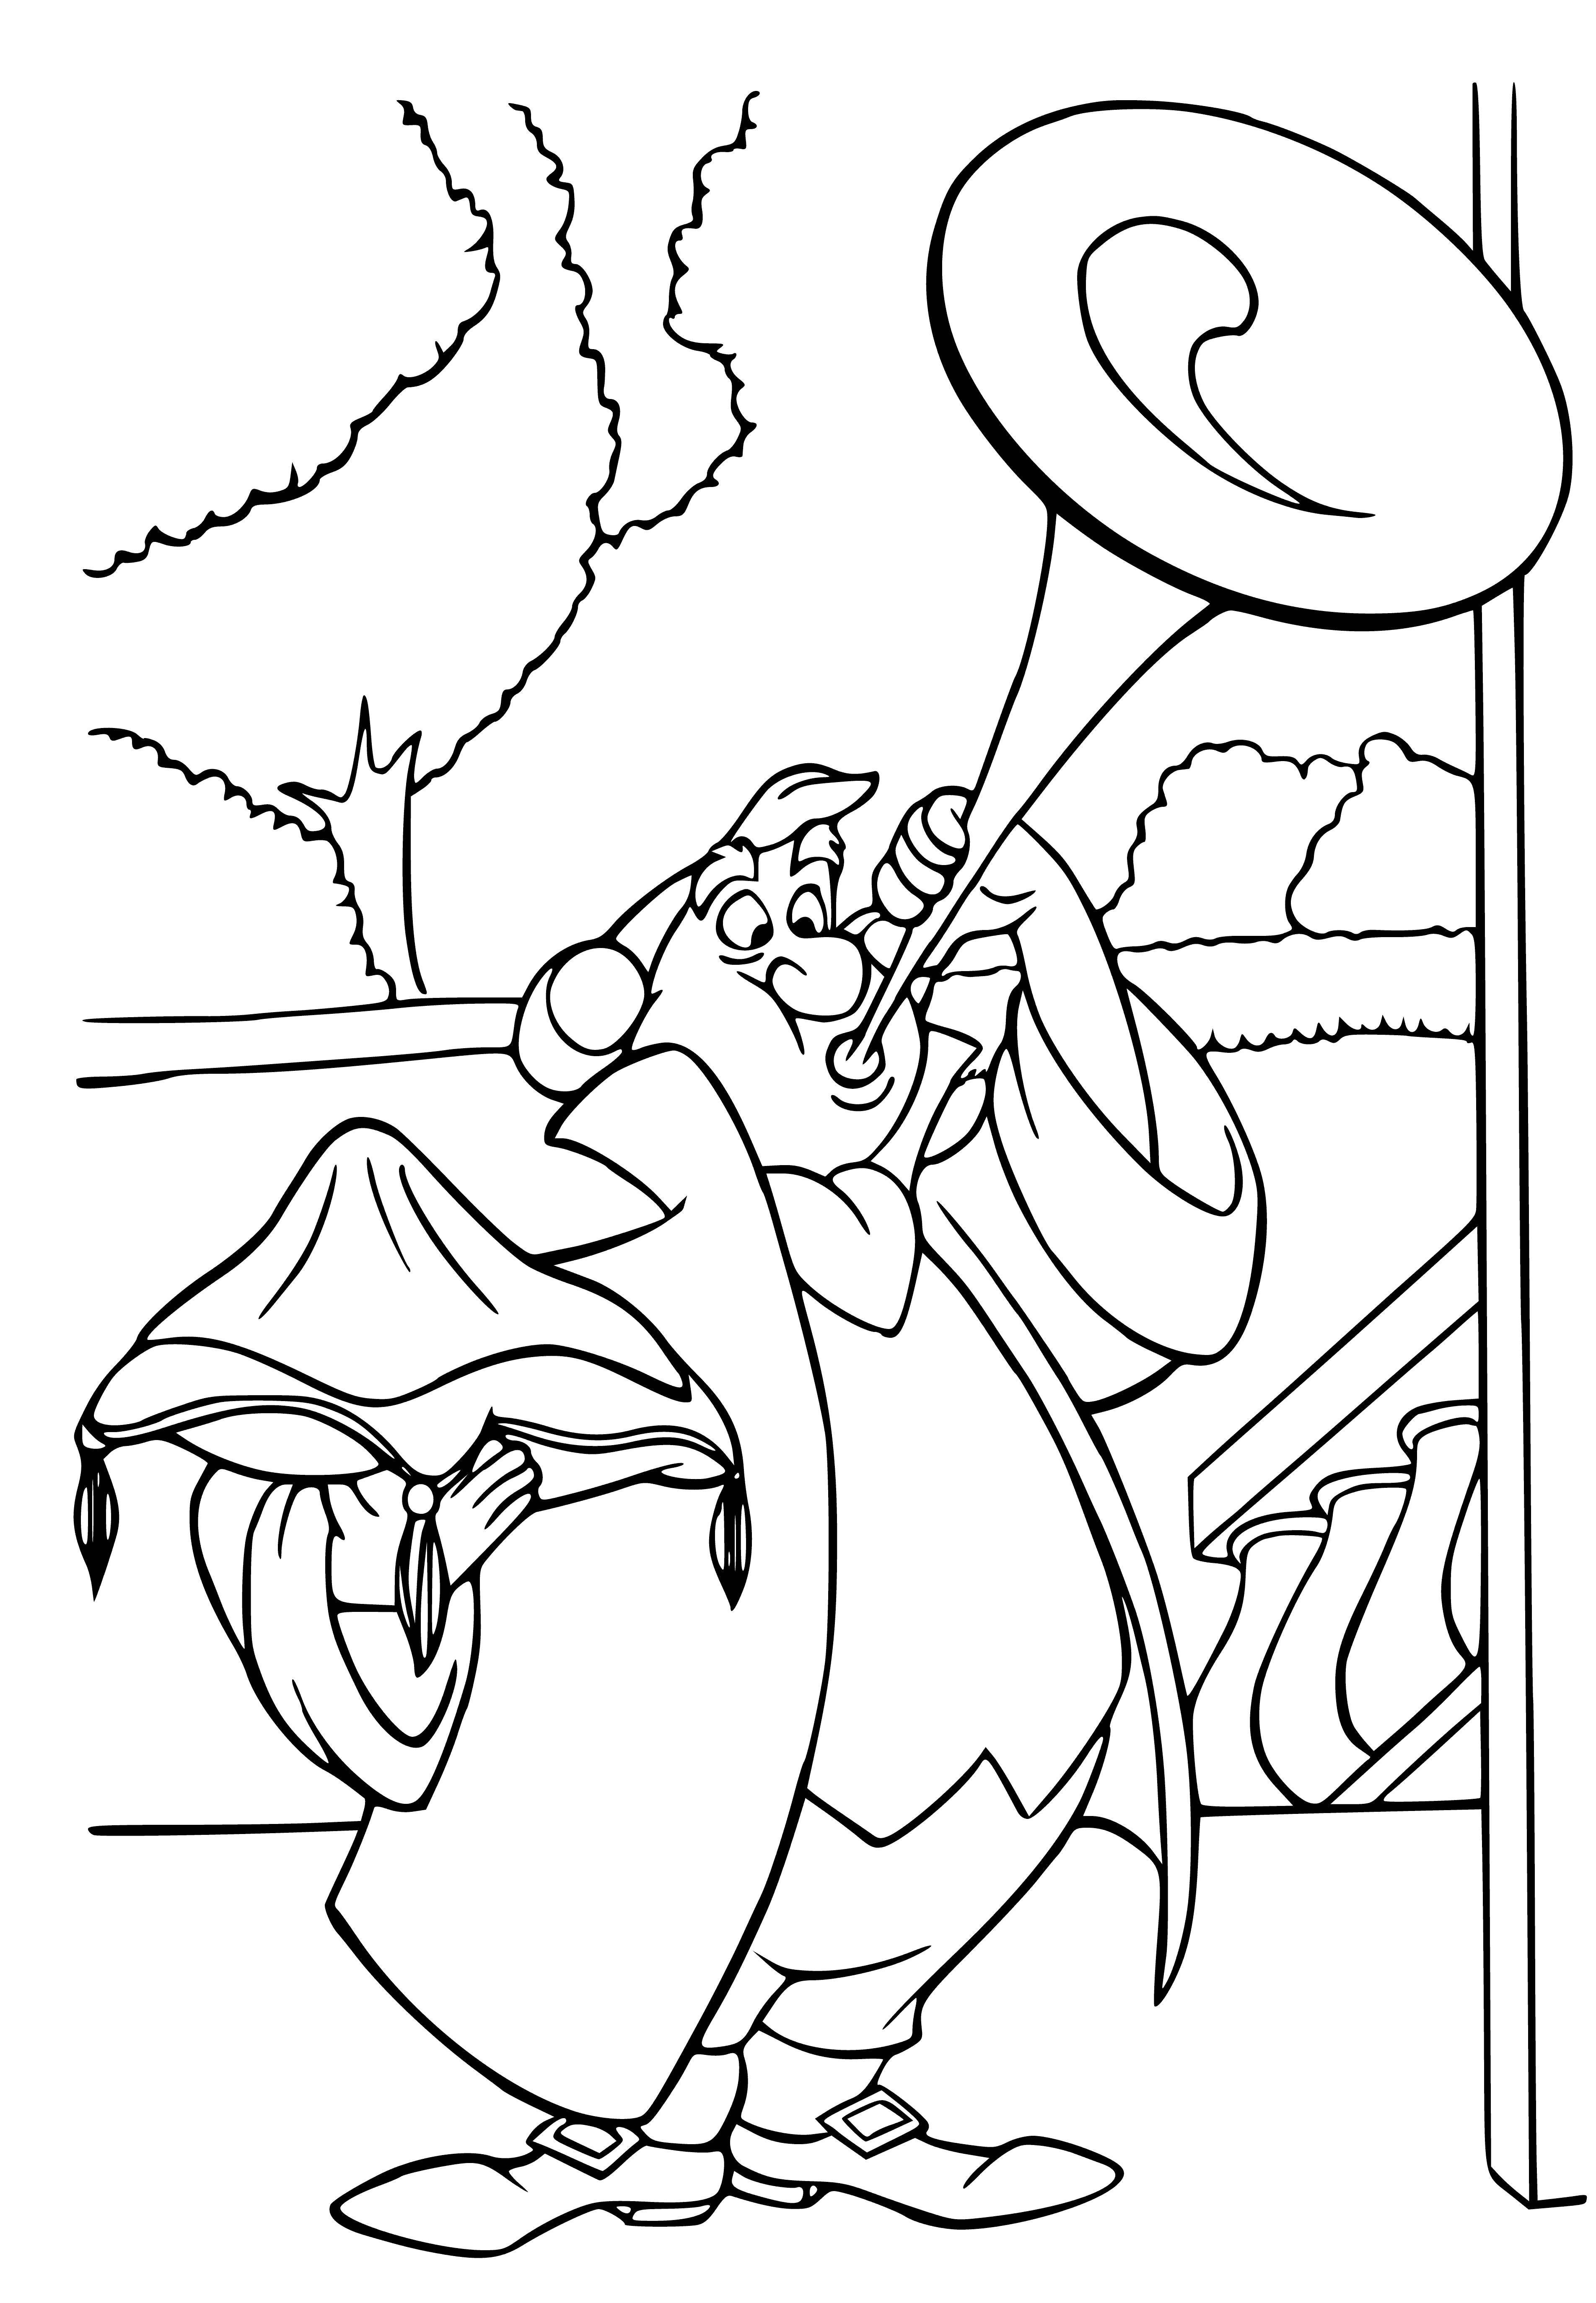 coloring page: Two women wearing crowns and long dresses, standing in front of a castle, each holding a scepter.